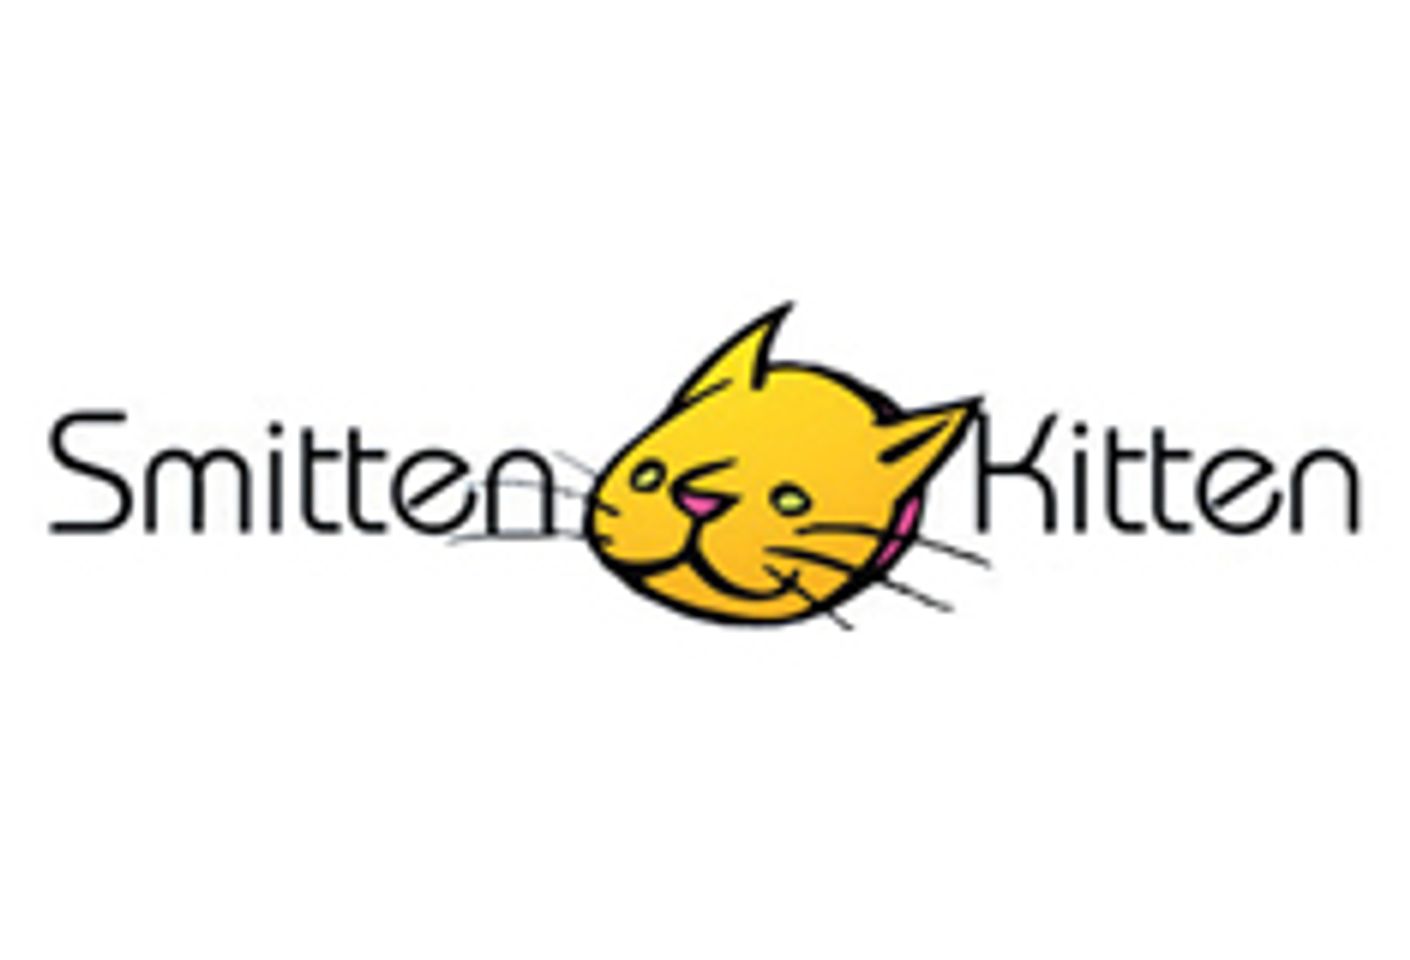 Smitten Kitten Offrers Free Sex and Relationship Classes